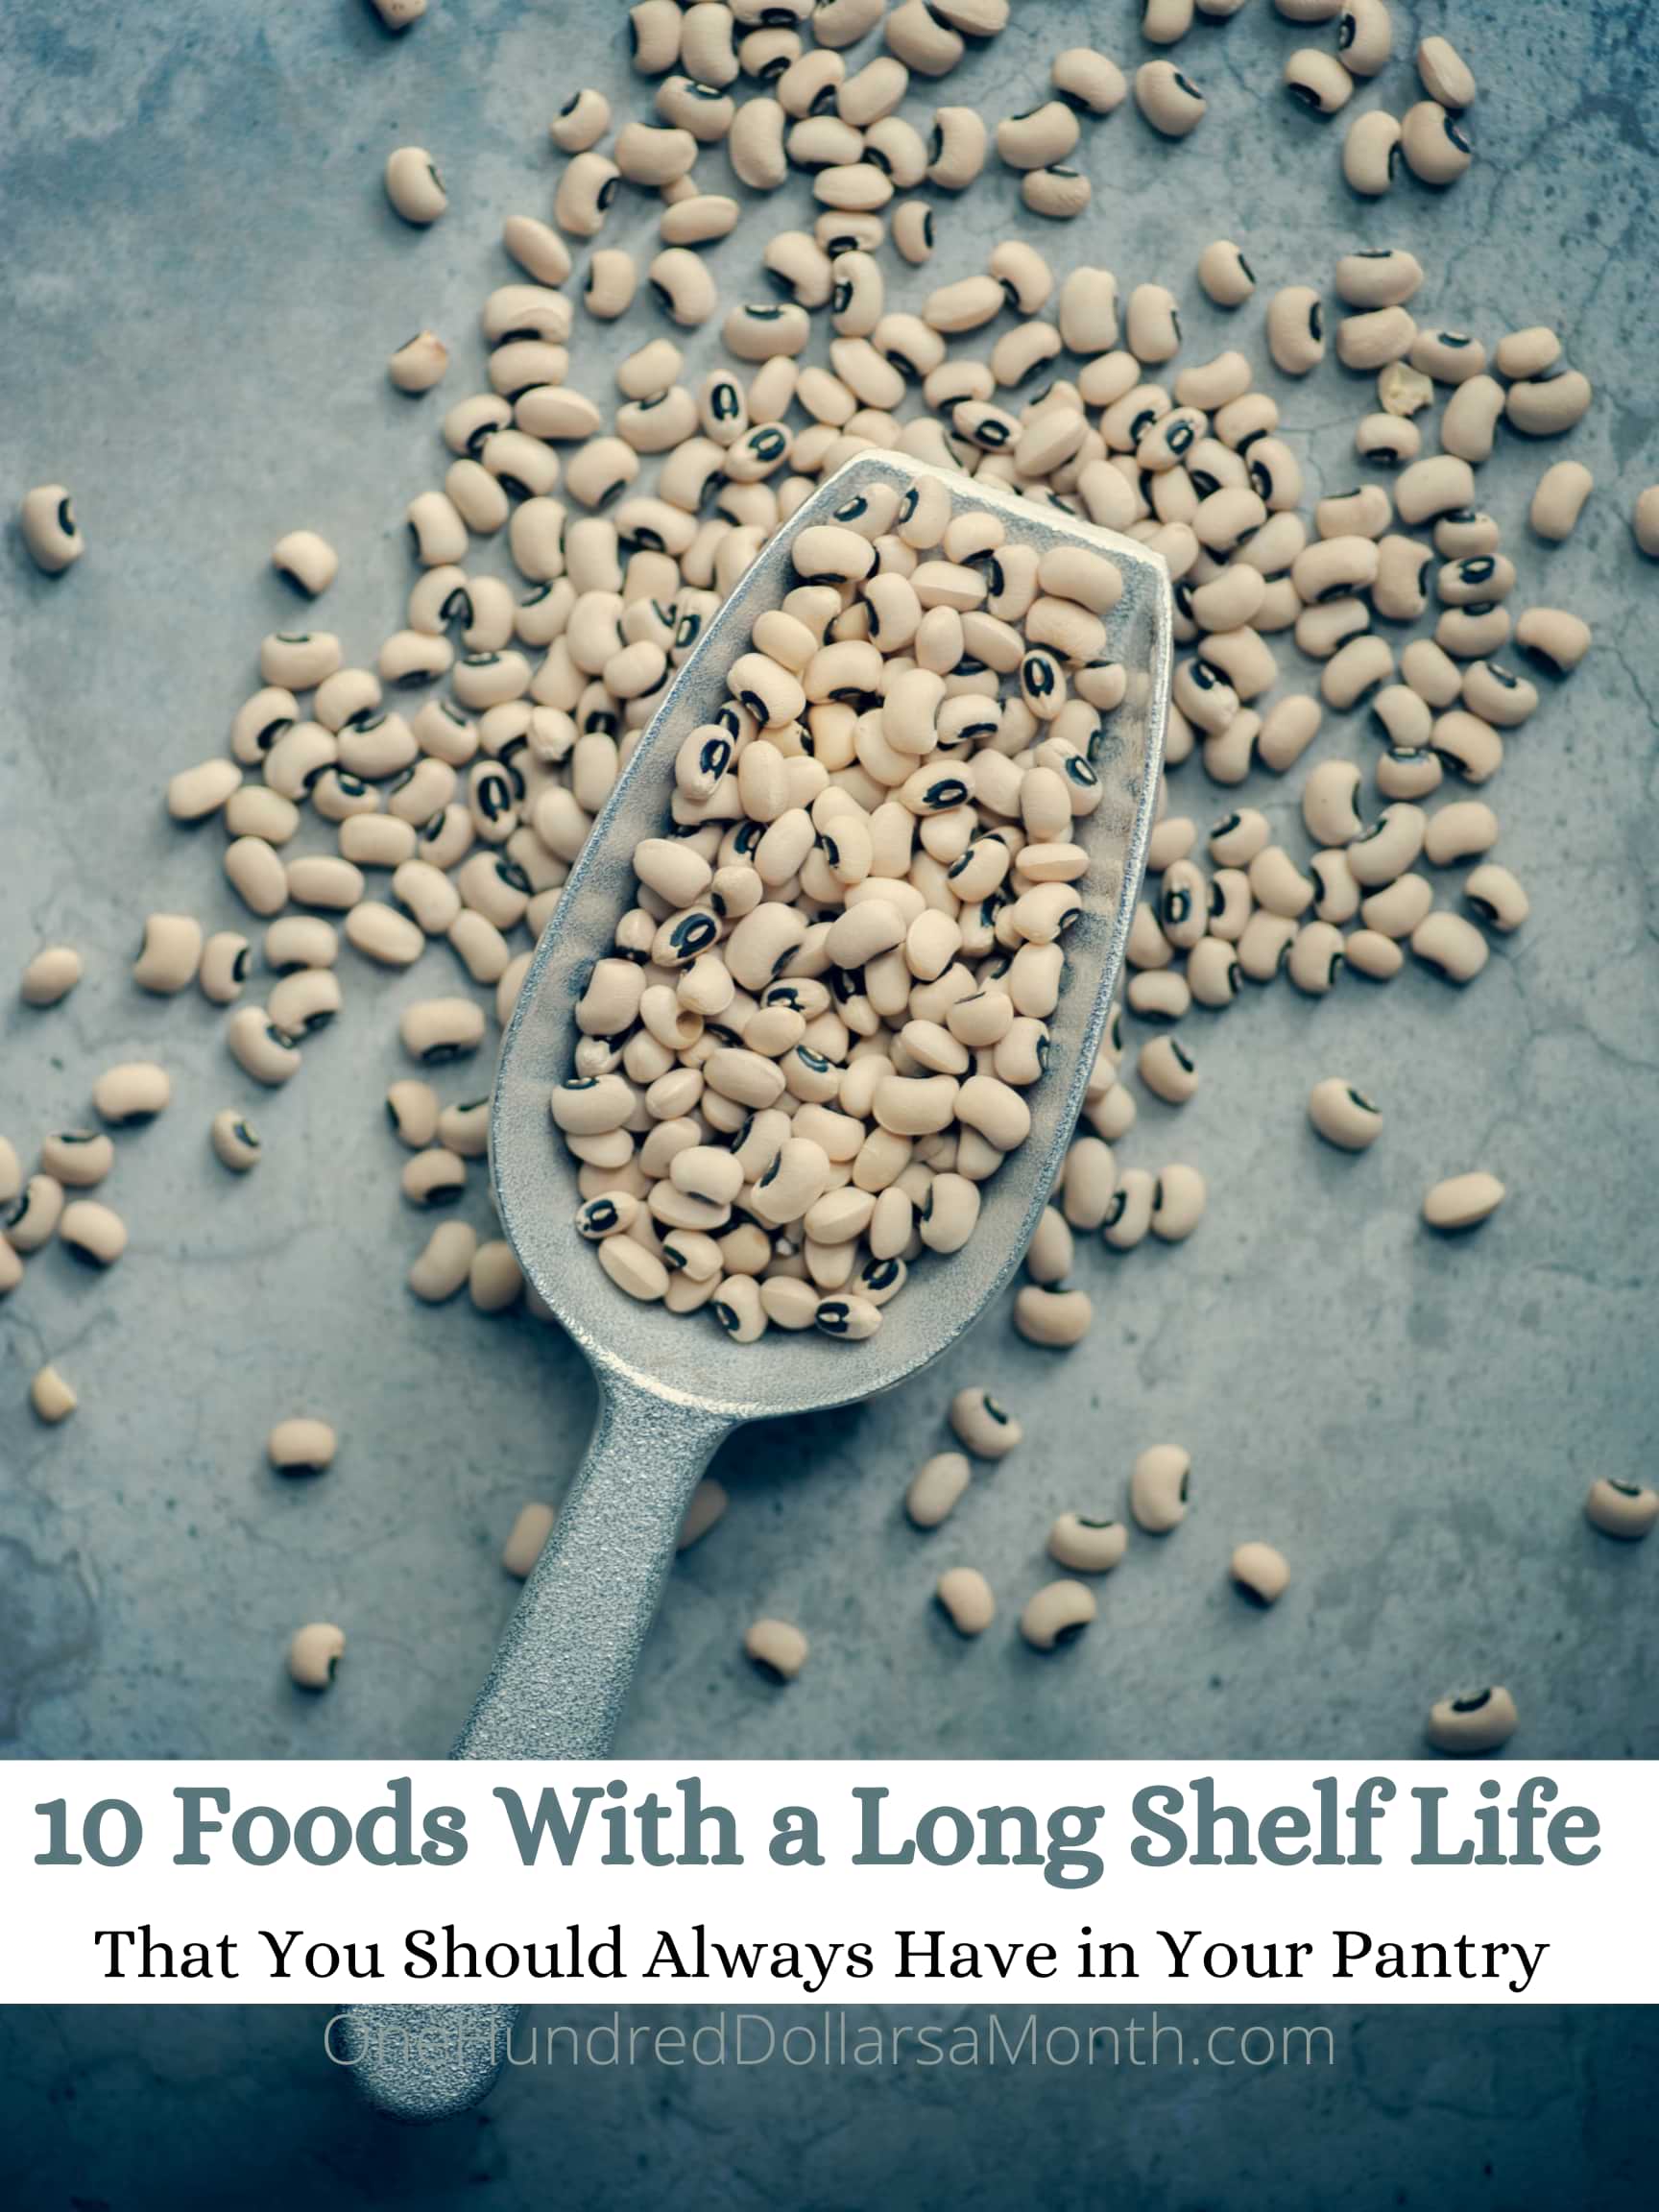 25 Long-Lasting Foods To Store In Your Pantry